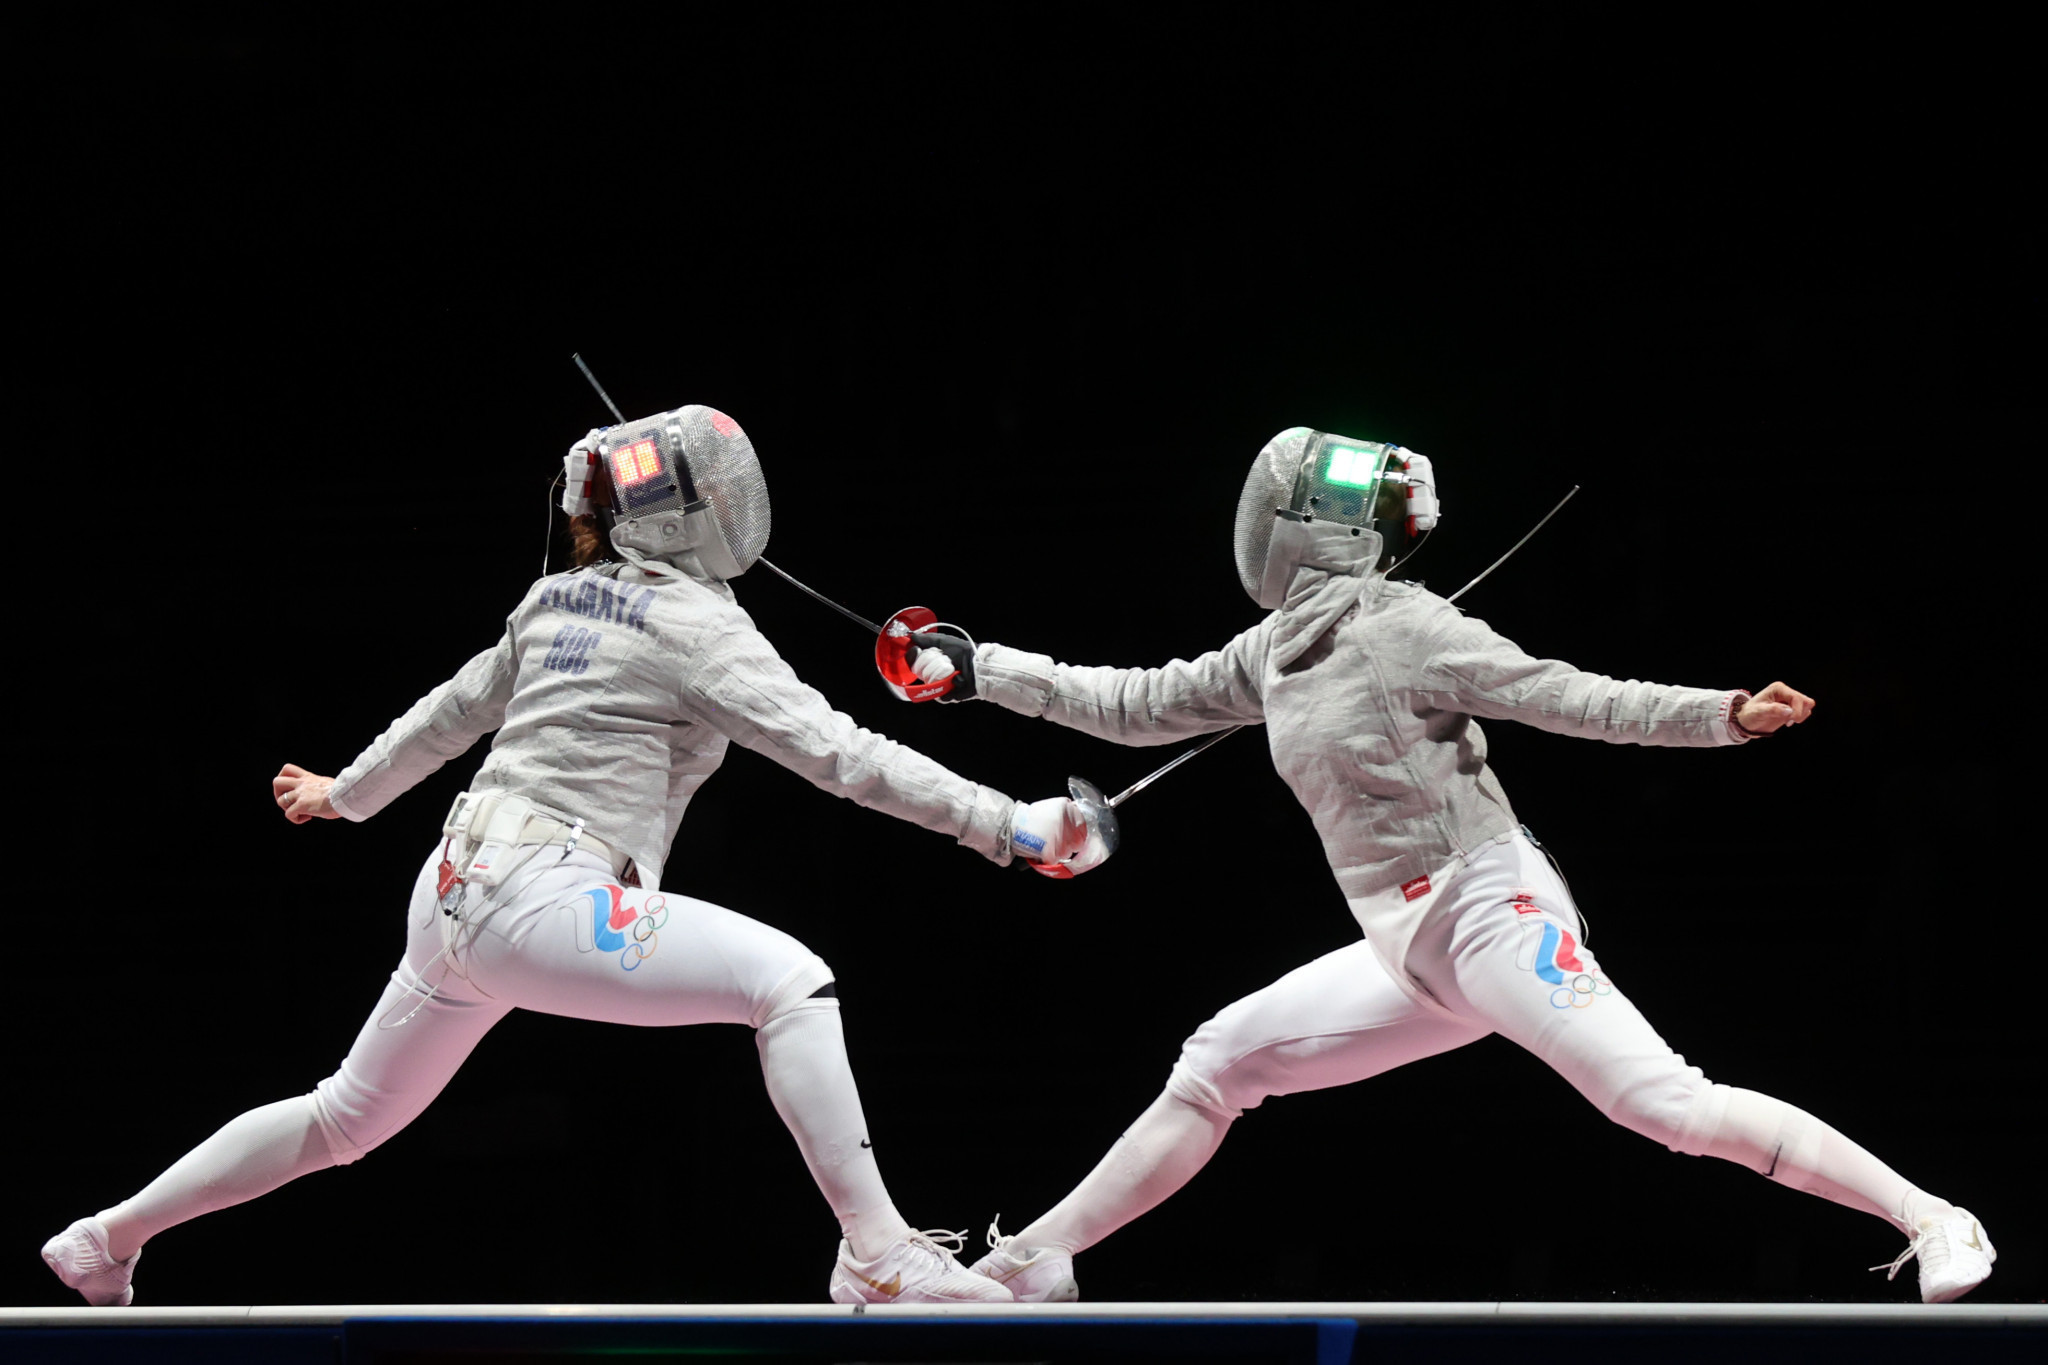 Sofya Velikaya, left, and Sofia Lokhanova, right, are first and third respectively in the women's sabre rankings, but are unable to compete in Istanbul due to a ban on Russian fencers ©Getty Images